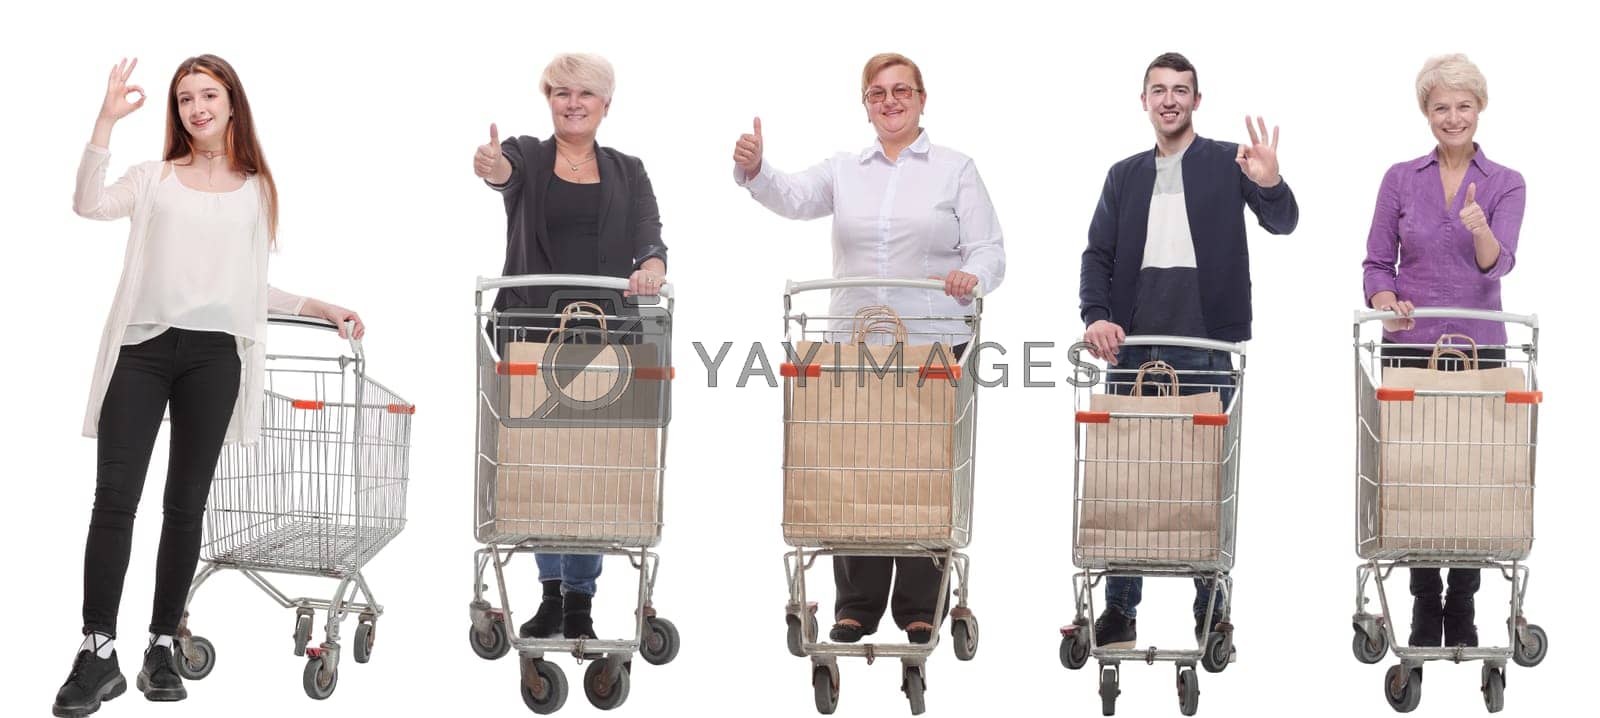 Royalty free image of group of people with shopping cart showing thumbs up by asdf